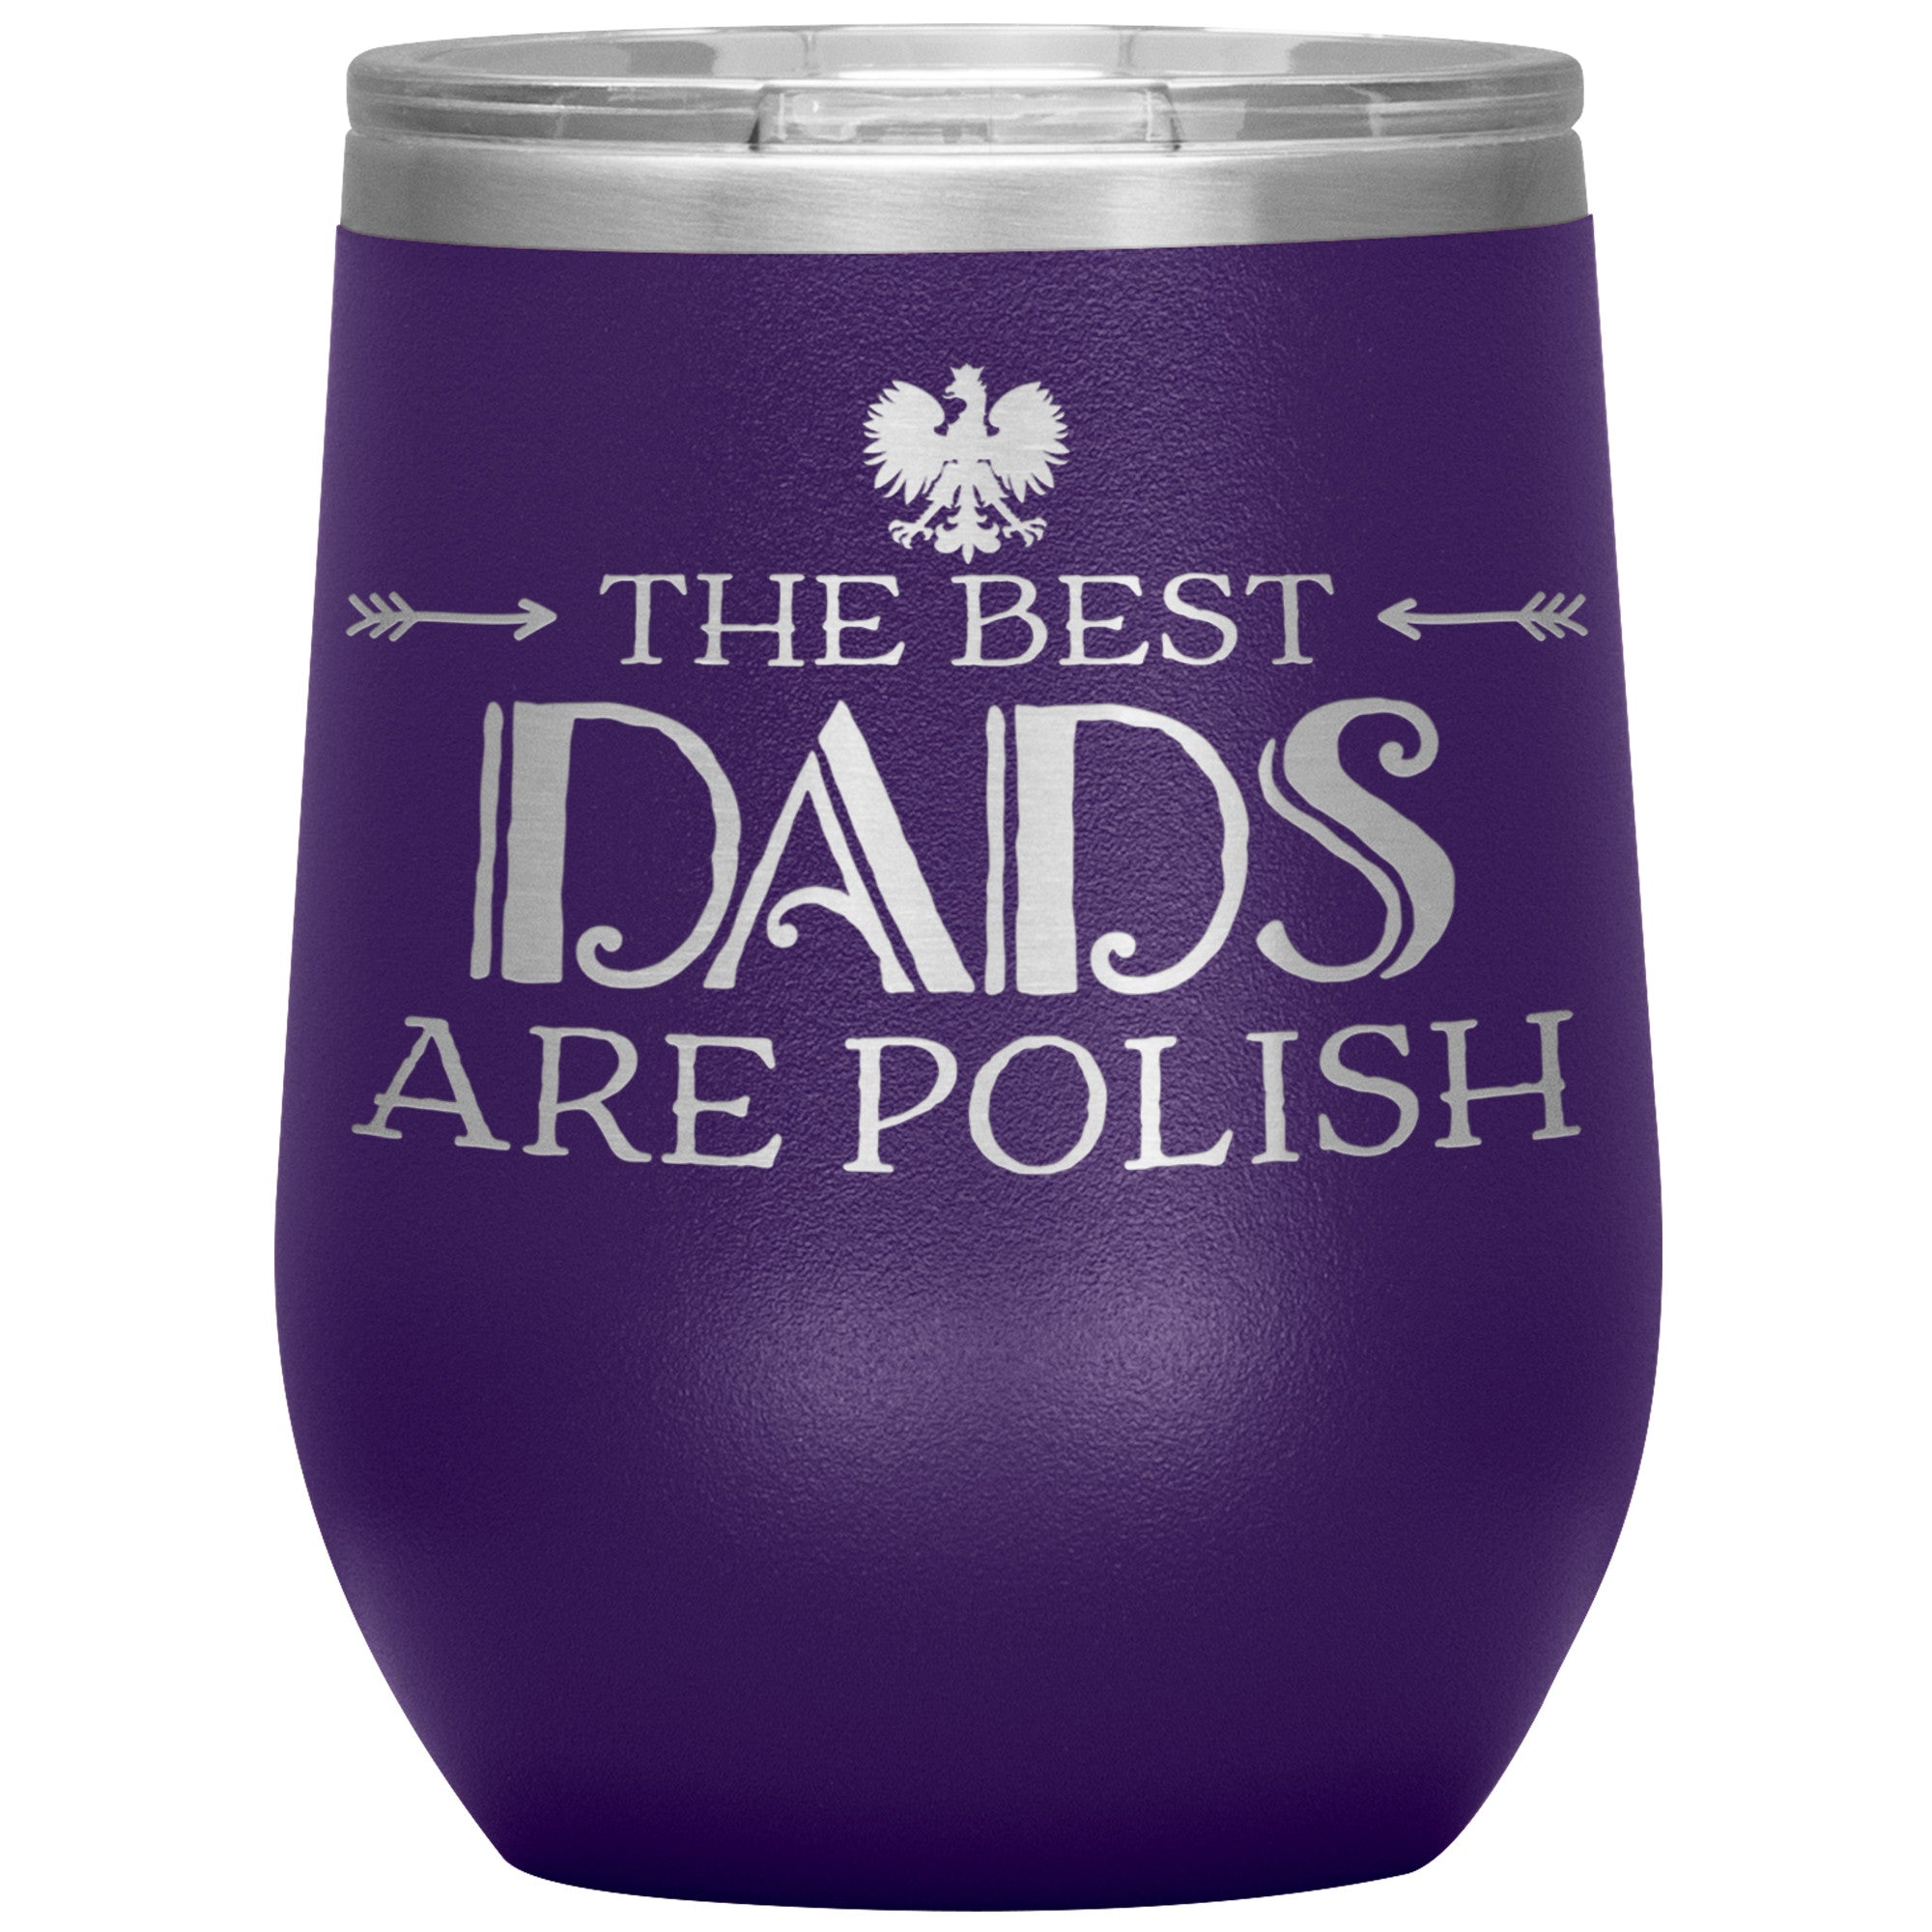 The Best Dads Are Polish Insulated Wine Tumbler Tumblers teelaunch Purple  